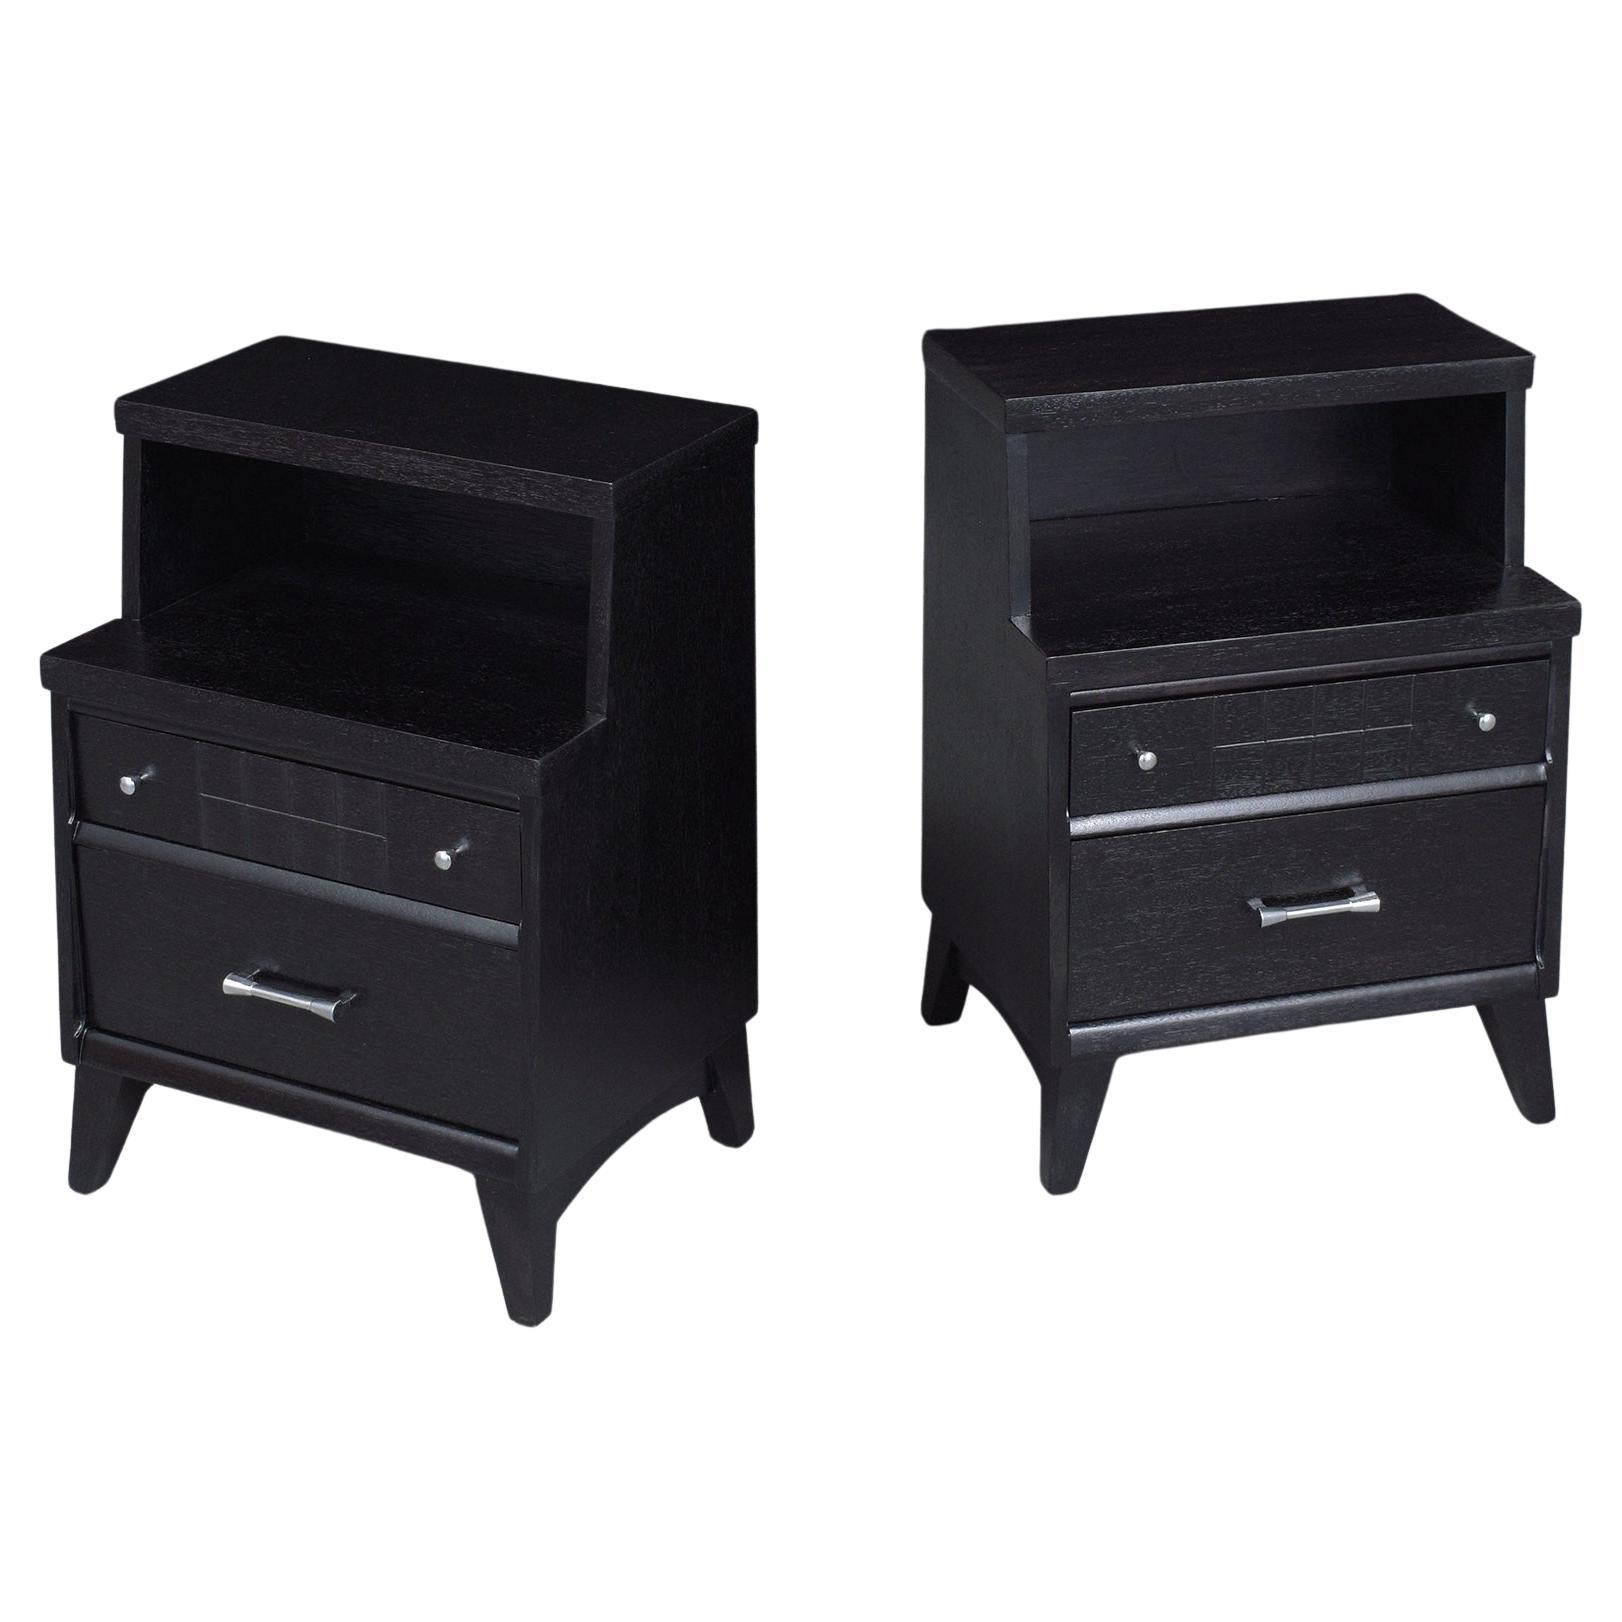 Vintage Mid-Century Modern Nightstands with Ebonized Finish and Chrome Hardware For Sale